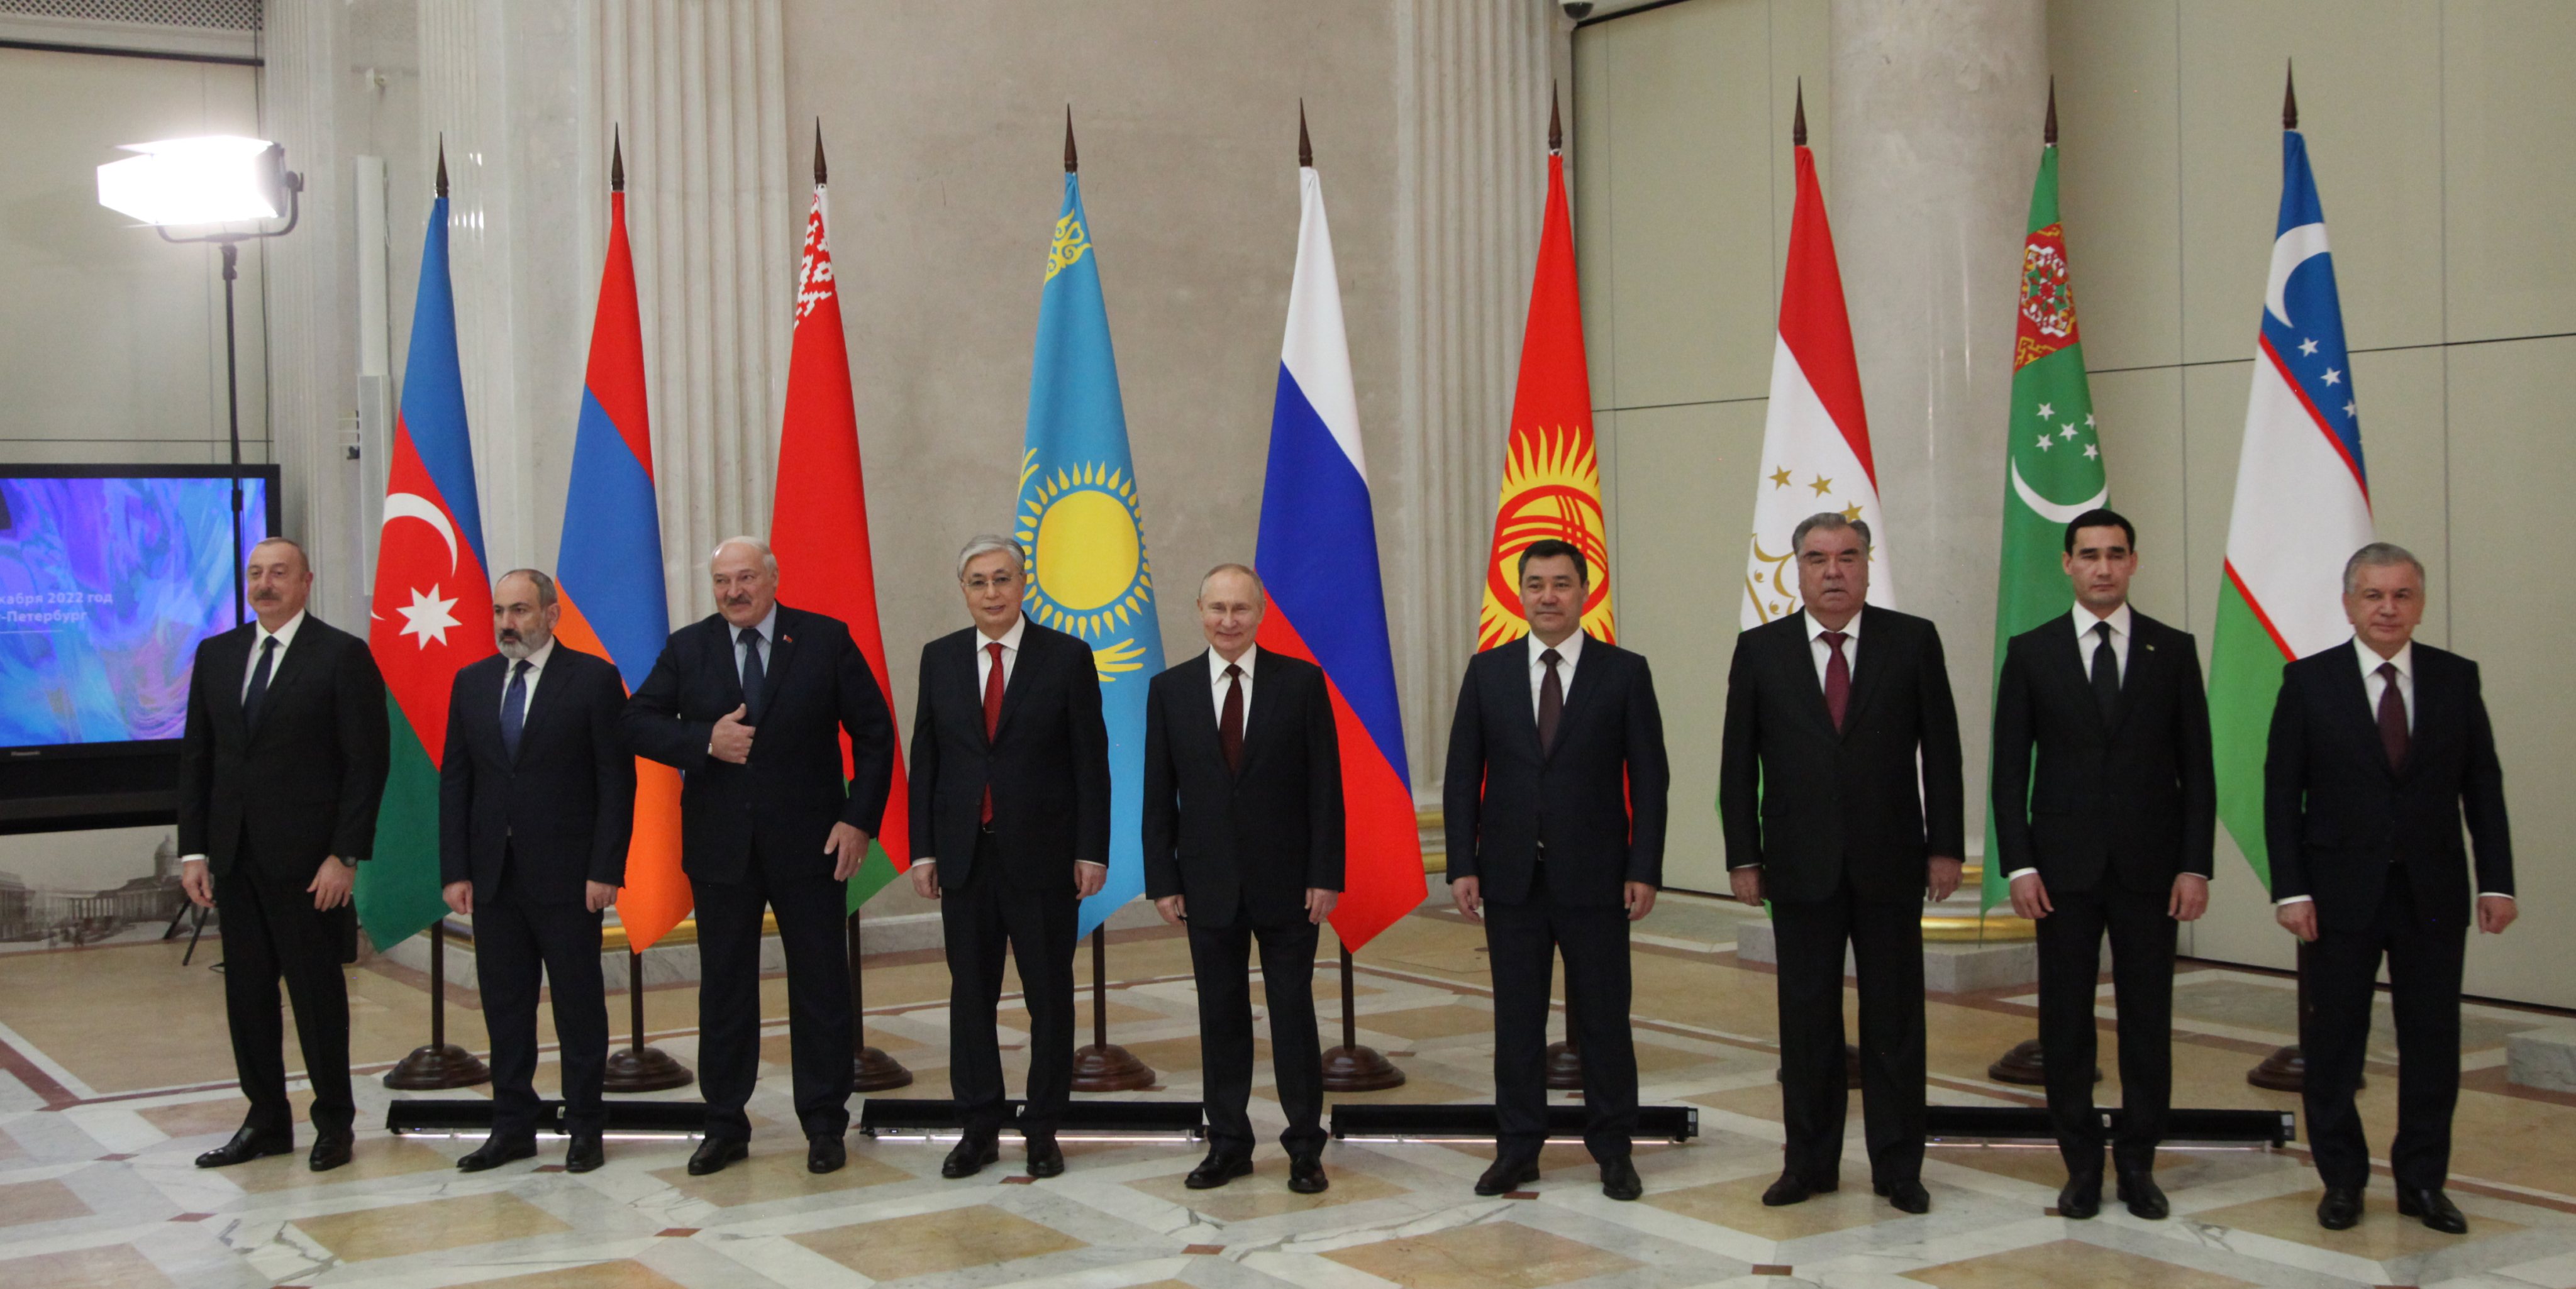 Russian President Putin Attends Summit Of The Commonwealth Of Independent States